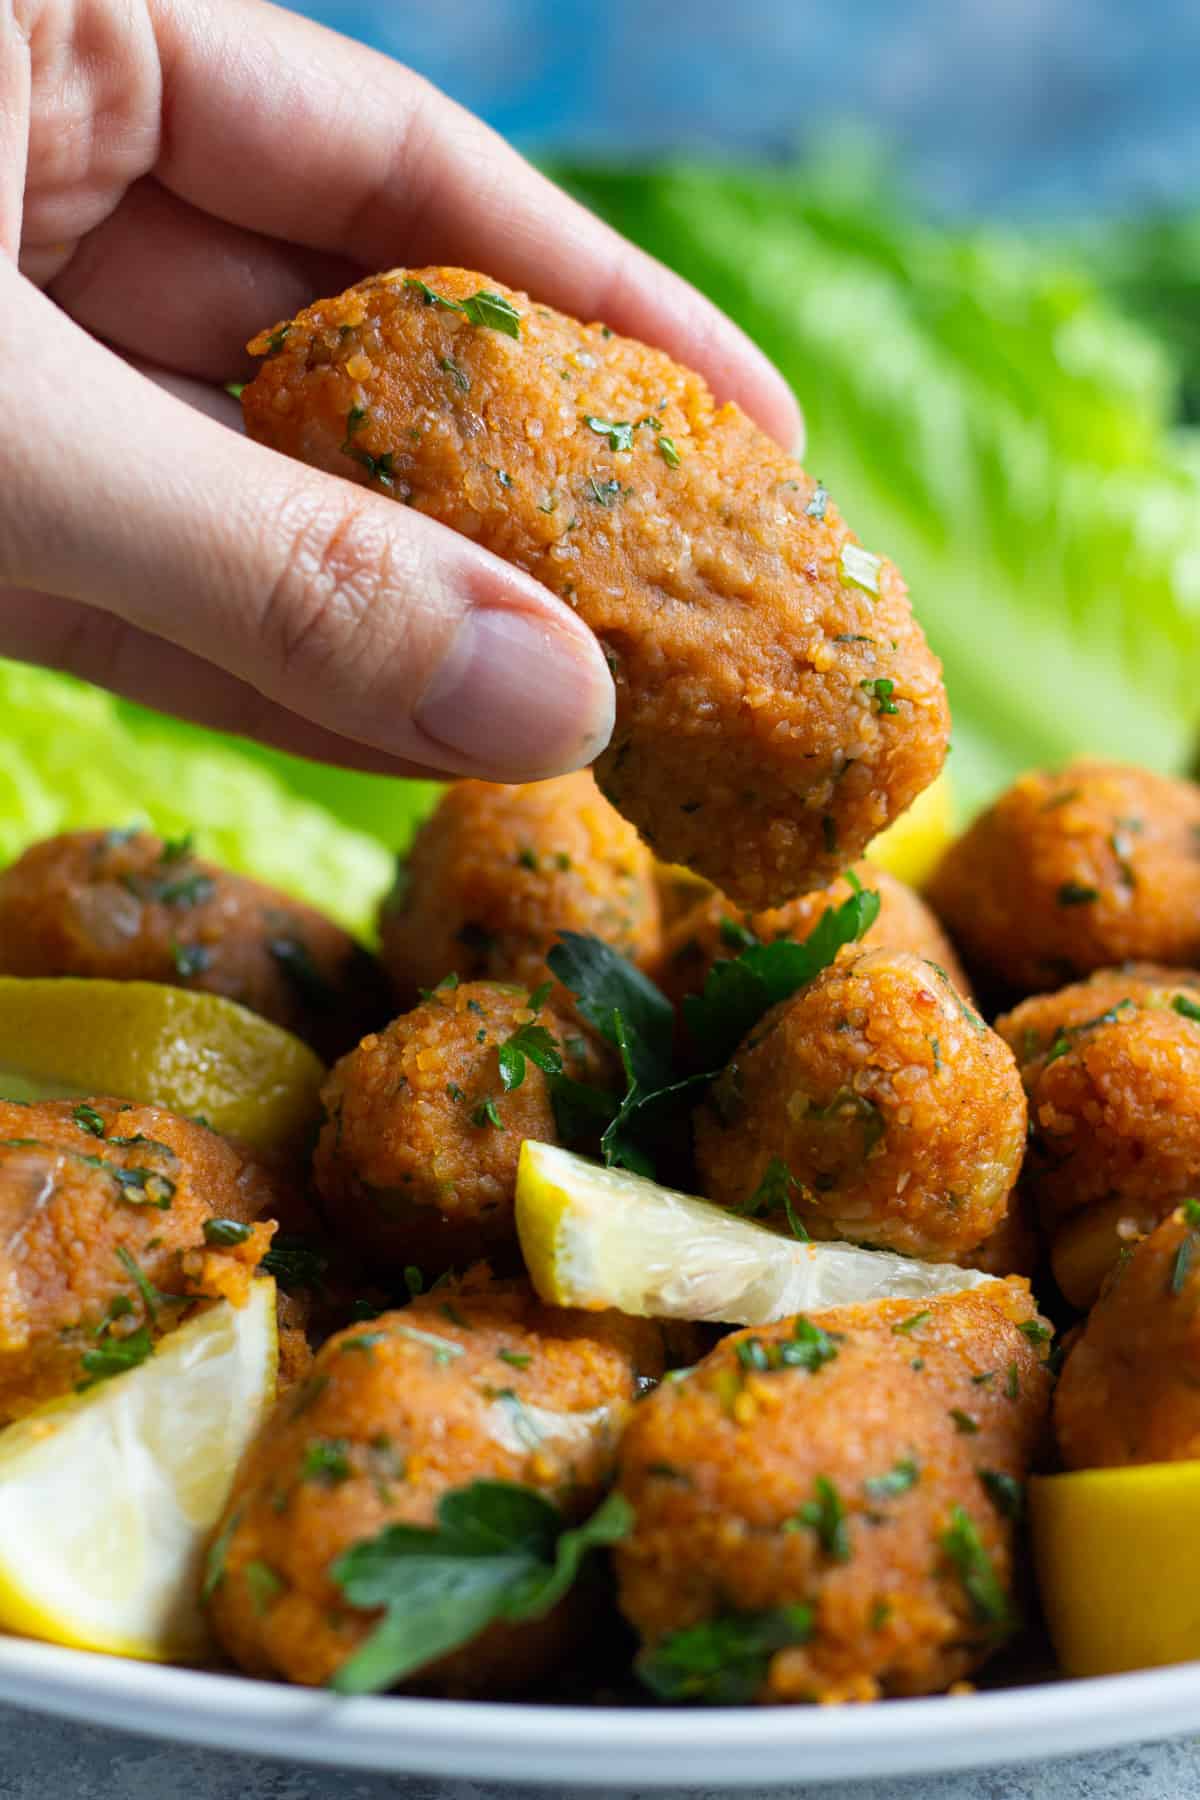 These vegan lentil meatballs are a Turkish classic. Made with red lentils and bulgur, these meatballs are usually served with lettuce and herbs. 
